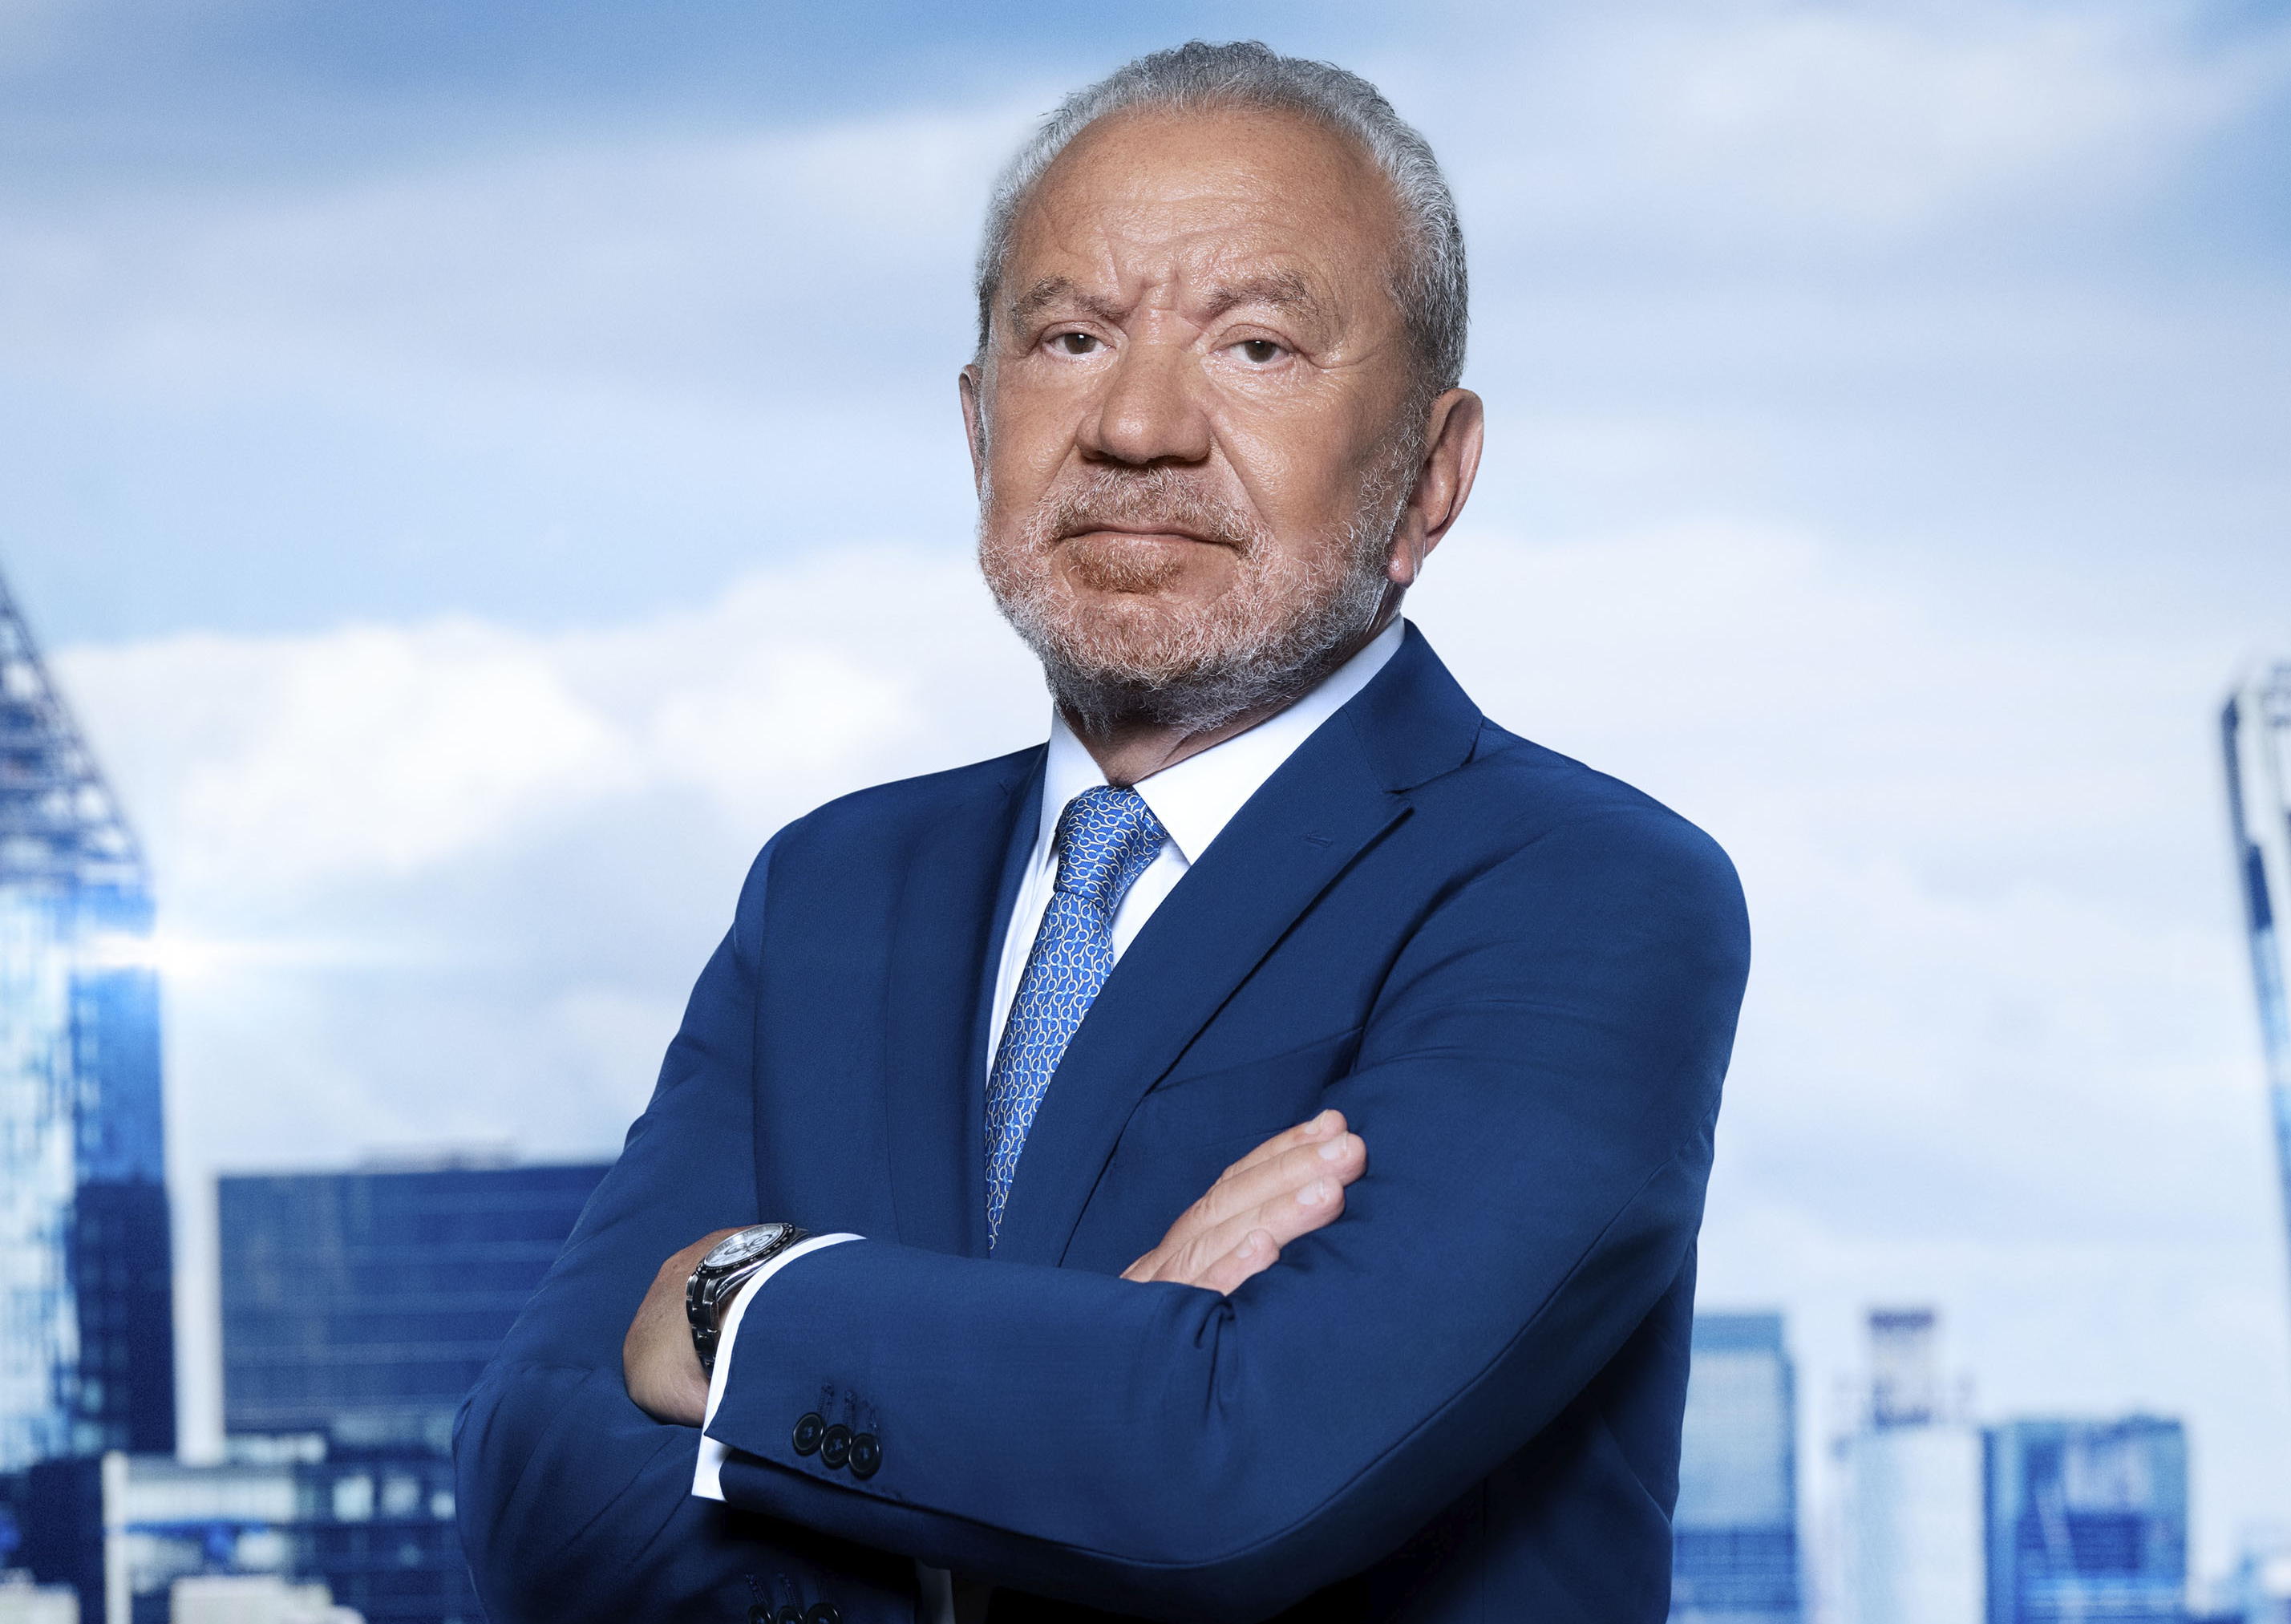 TV tonight Lord Sugar wants the candidates to brush up their skills!